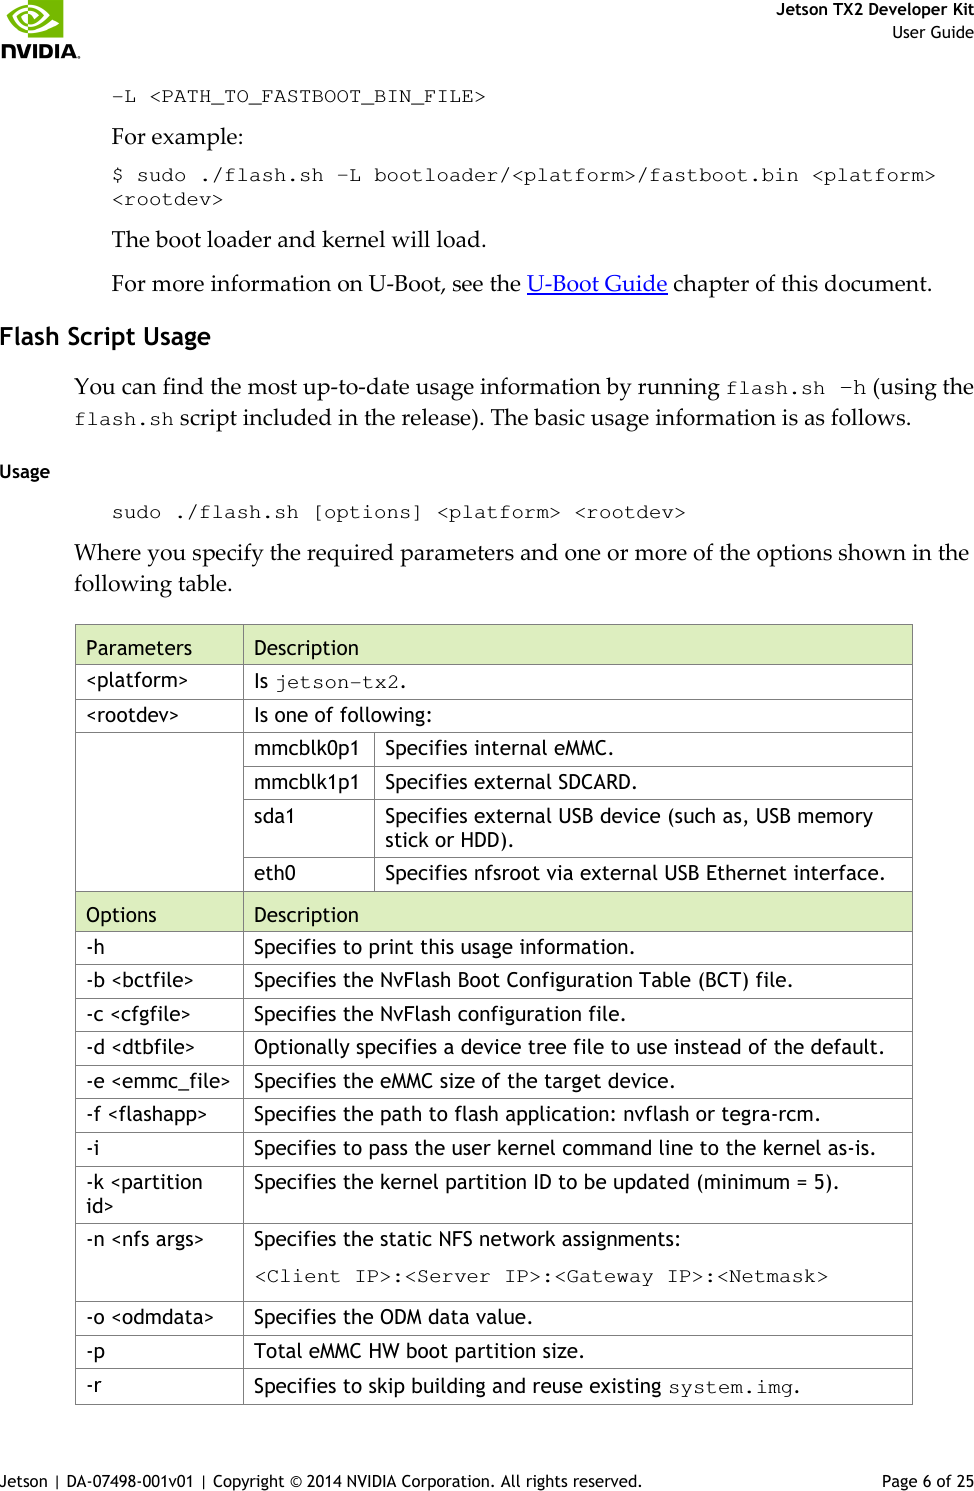     Jetson TX2 Developer Kit     User Guide Jetson | DA-07498-001v01 | Copyright © 2014 NVIDIA Corporation. All rights reserved.  Page 6 of 25 -L &lt;PATH_TO_FASTBOOT_BIN_FILE&gt; For example: $ sudo ./flash.sh –L bootloader/&lt;platform&gt;/fastboot.bin &lt;platform&gt; &lt;rootdev&gt; The boot loader and kernel will load. For more information on U-Boot, see the U-Boot Guide chapter of this document. Flash Script Usage You can find the most up-to-date usage information by running flash.sh –h (using the flash.sh script included in the release). The basic usage information is as follows. Usage sudo ./flash.sh [options] &lt;platform&gt; &lt;rootdev&gt; Where you specify the required parameters and one or more of the options shown in the following table. Parameters Description &lt;platform&gt;  Is jetson-tx2. &lt;rootdev&gt;  Is one of following:   mmcblk0p1  Specifies internal eMMC. mmcblk1p1  Specifies external SDCARD. sda1  Specifies external USB device (such as, USB memory stick or HDD). eth0  Specifies nfsroot via external USB Ethernet interface. Options Description -h  Specifies to print this usage information. -b &lt;bctfile&gt;  Specifies the NvFlash Boot Configuration Table (BCT) file. -c &lt;cfgfile&gt;  Specifies the NvFlash configuration file. -d &lt;dtbfile&gt;  Optionally specifies a device tree file to use instead of the default. -e &lt;emmc_file&gt; Specifies the eMMC size of the target device. -f &lt;flashapp&gt;  Specifies the path to flash application: nvflash or tegra-rcm. -i  Specifies to pass the user kernel command line to the kernel as-is. -k &lt;partition id&gt; Specifies the kernel partition ID to be updated (minimum = 5). -n &lt;nfs args&gt;  Specifies the static NFS network assignments: &lt;Client IP&gt;:&lt;Server IP&gt;:&lt;Gateway IP&gt;:&lt;Netmask&gt; -o &lt;odmdata&gt;  Specifies the ODM data value. -p  Total eMMC HW boot partition size. -r  Specifies to skip building and reuse existing system.img. 